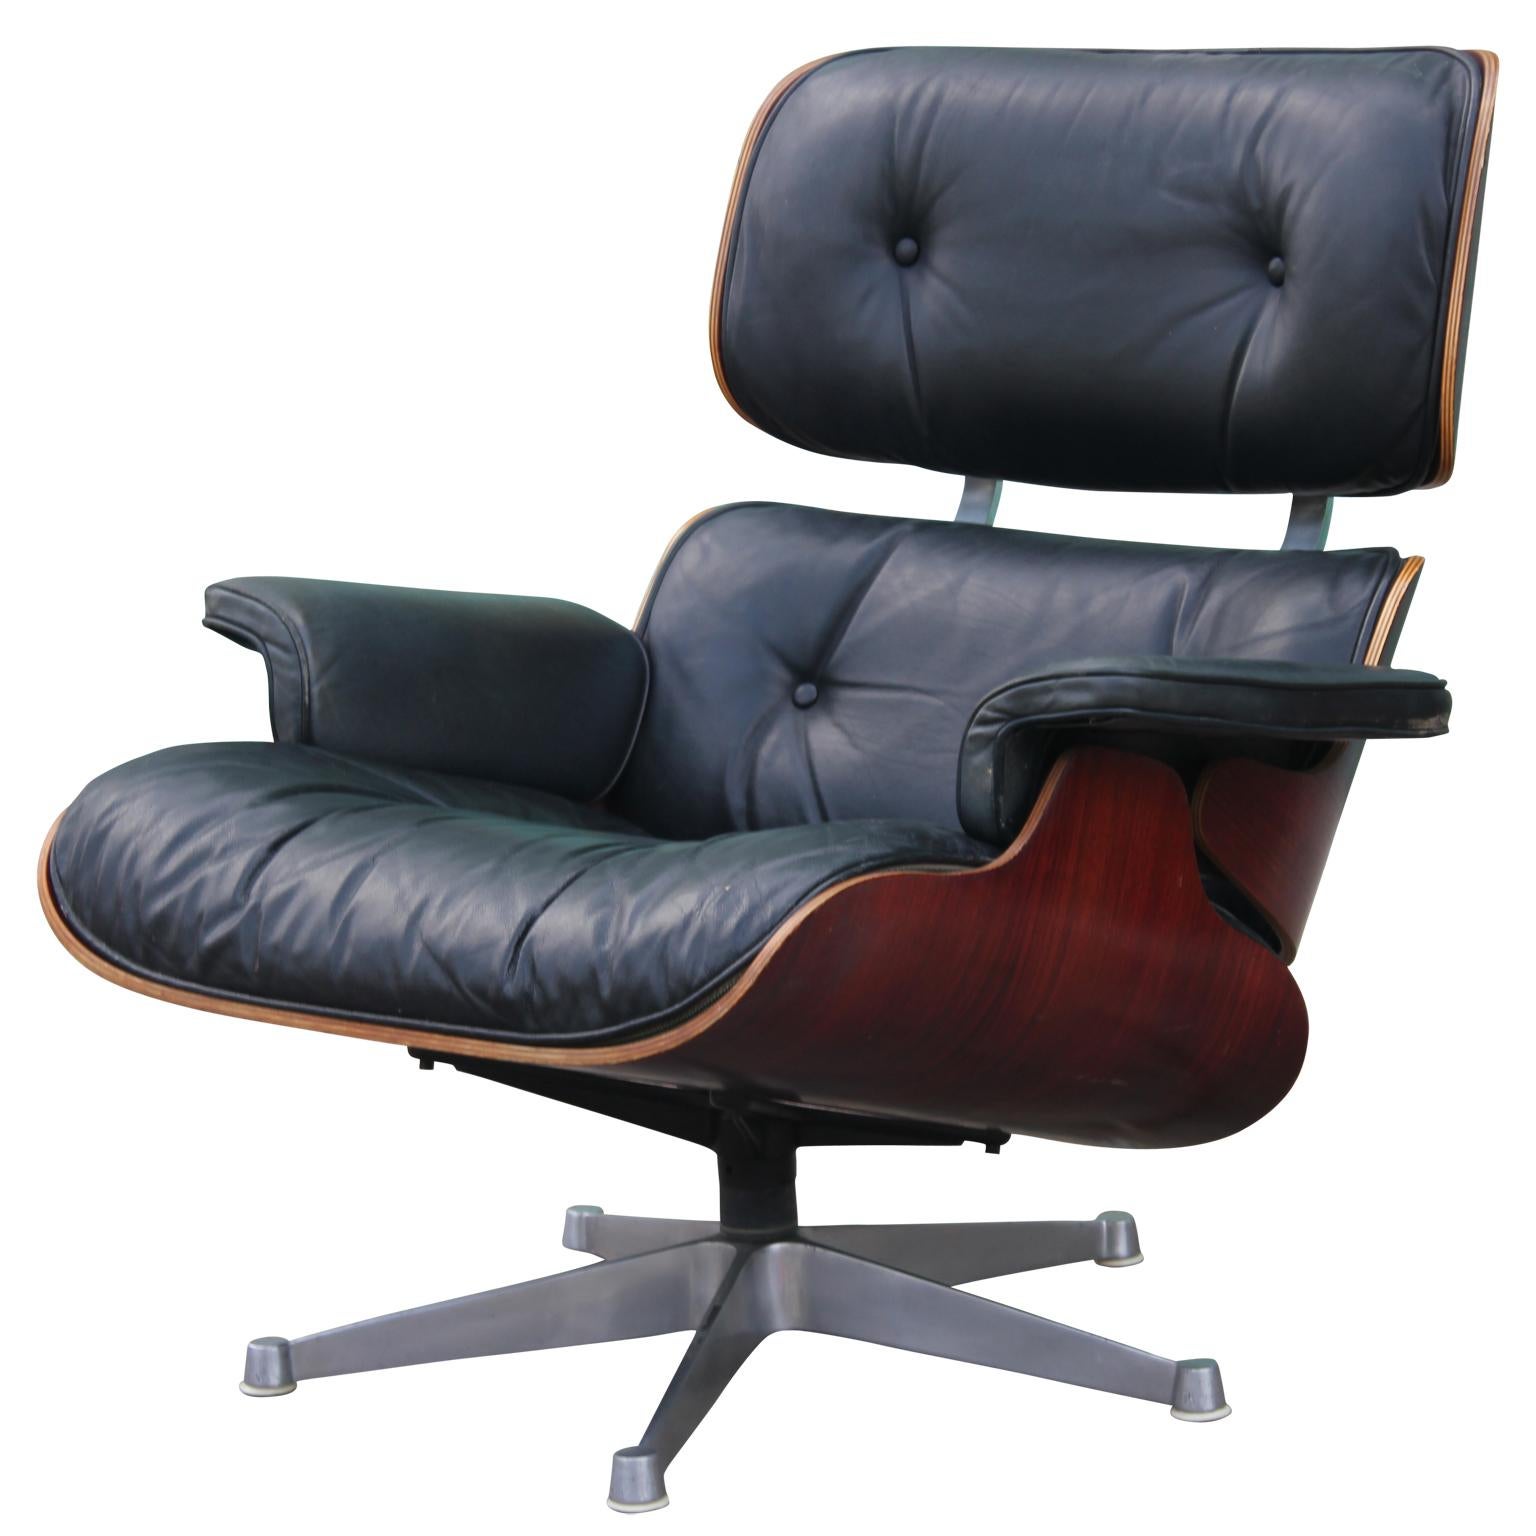 Late 20th Century Modern Black Leather and Rosewood Vitra Eames Lounge Chair and Ottoman